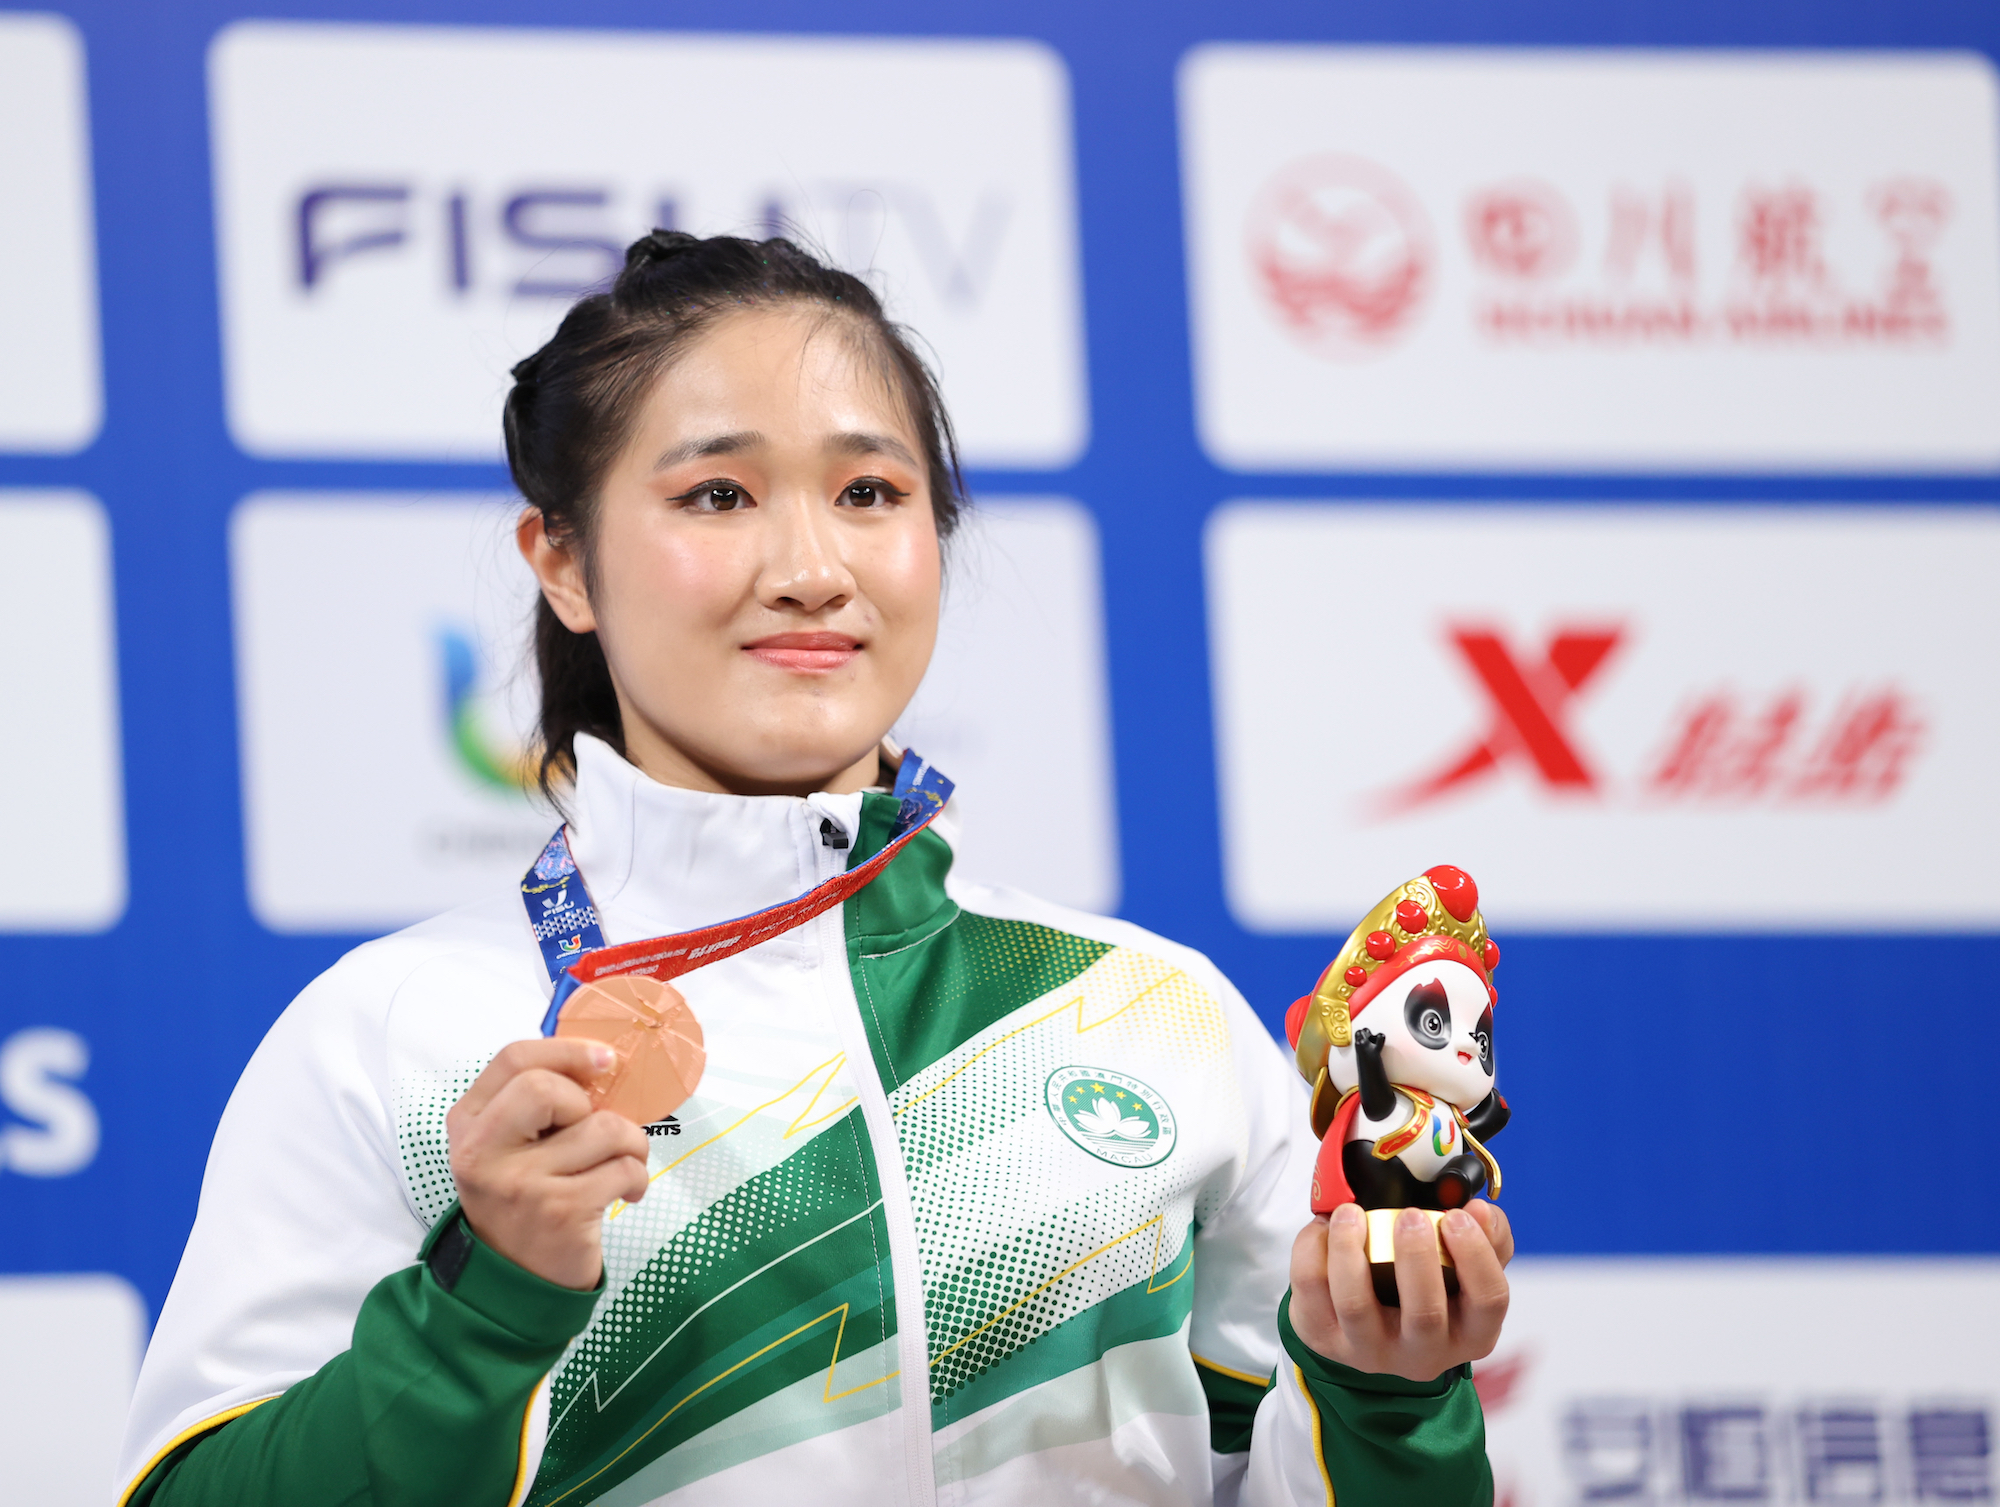 Wong posing with her bronze medal in the women’s ‘nanquan’ category at the 2023 FISU World University Games in Chengdu